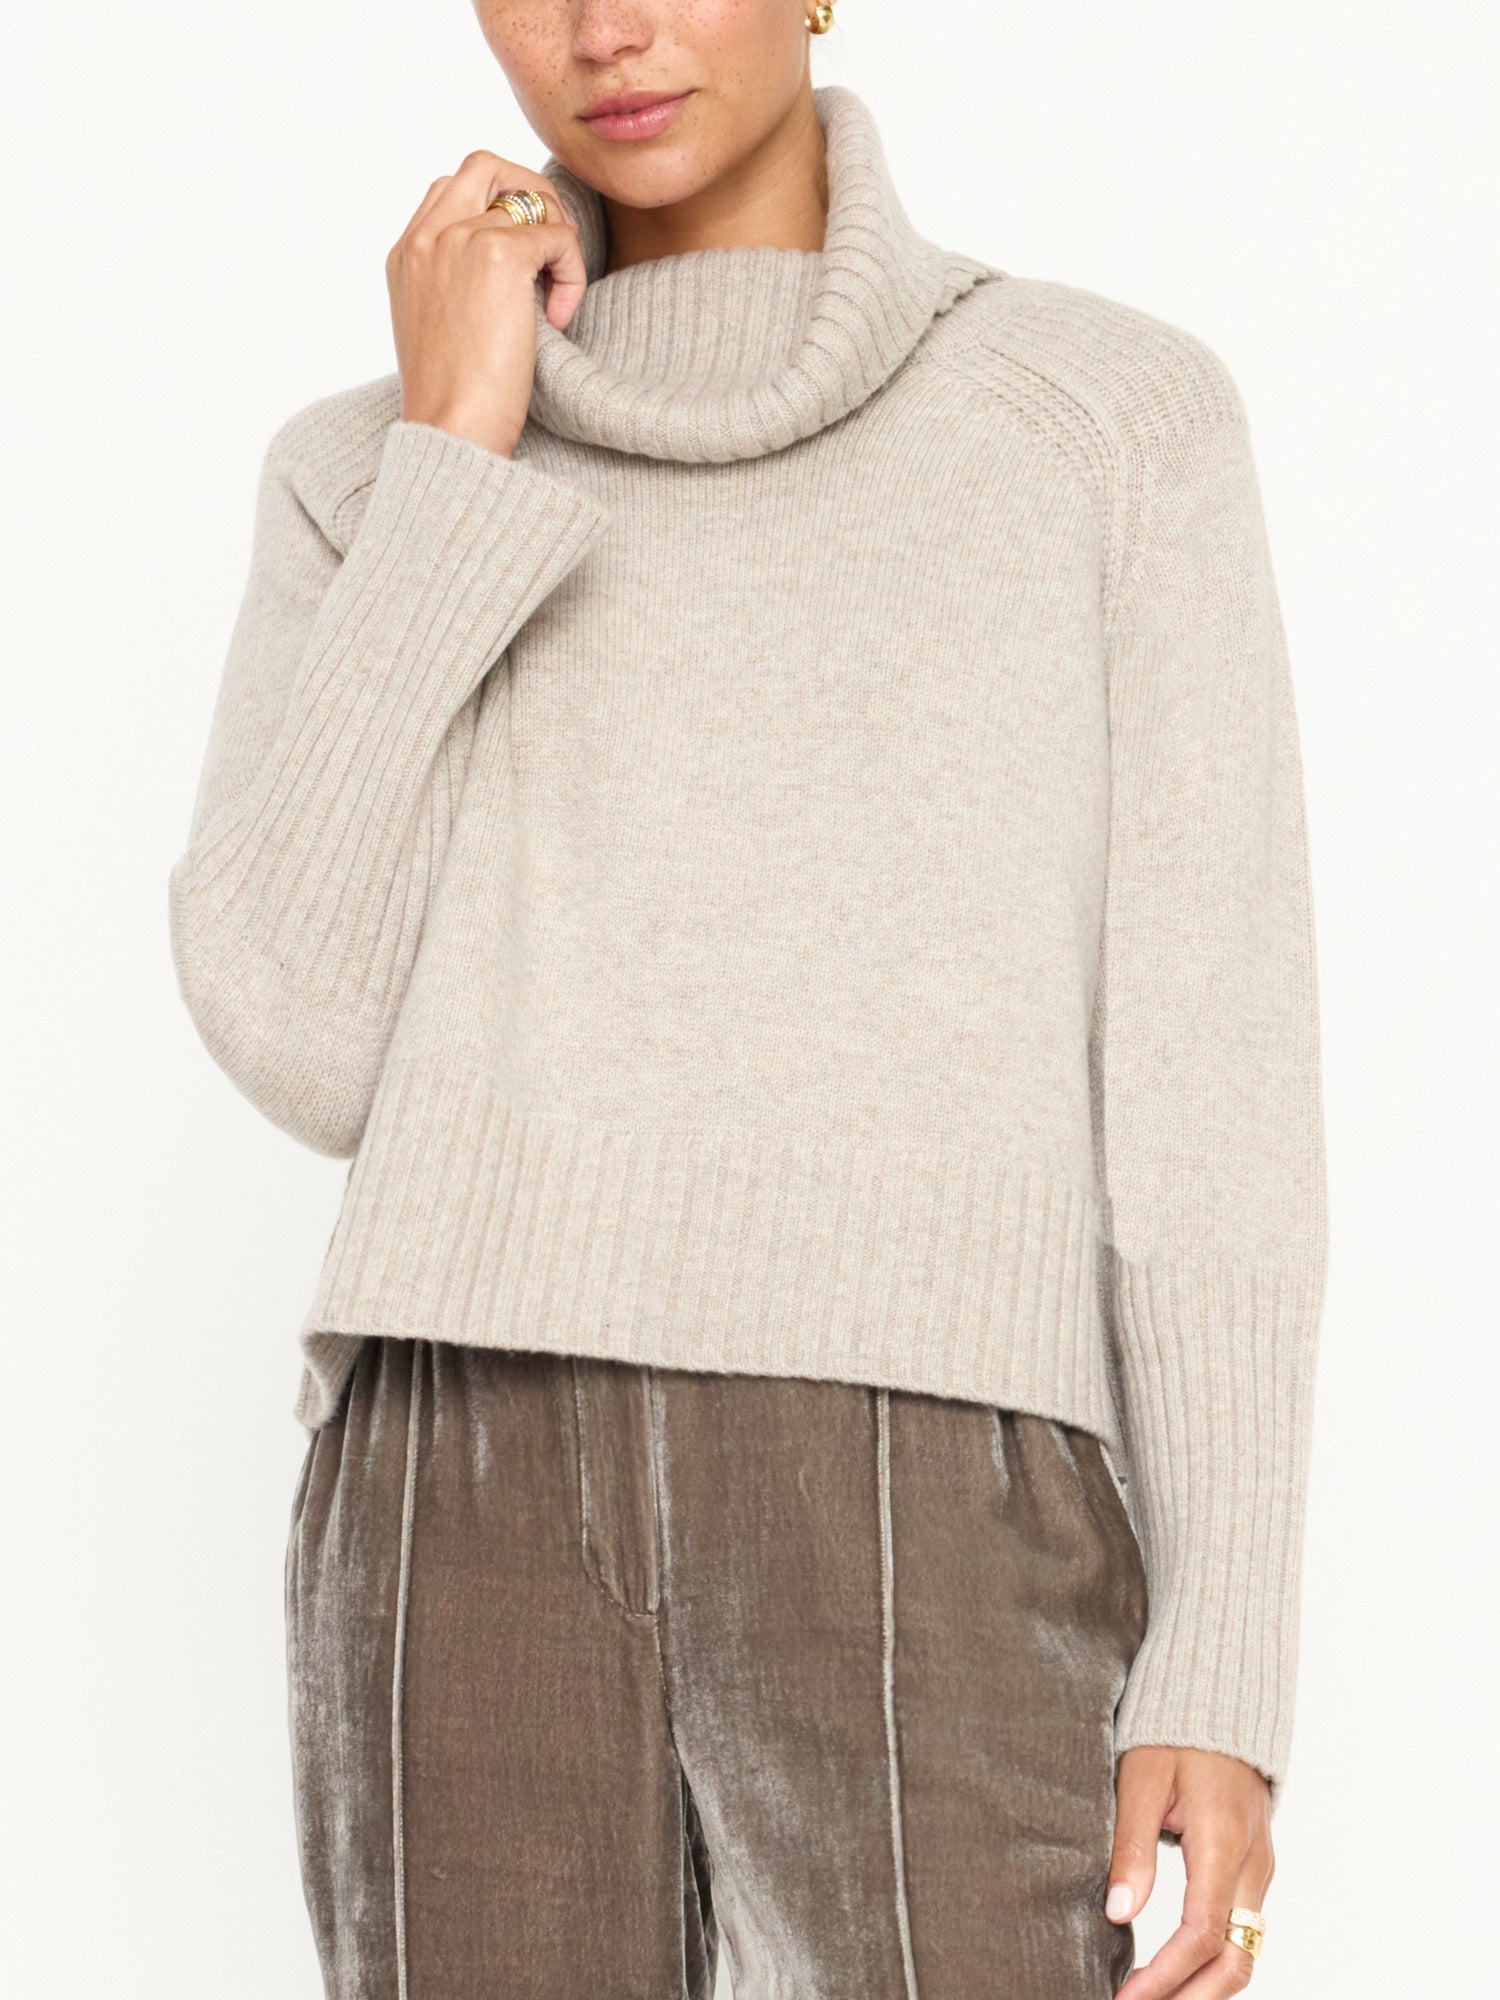 Orion cashmere-wool light grey turtleneck sweater front view 3